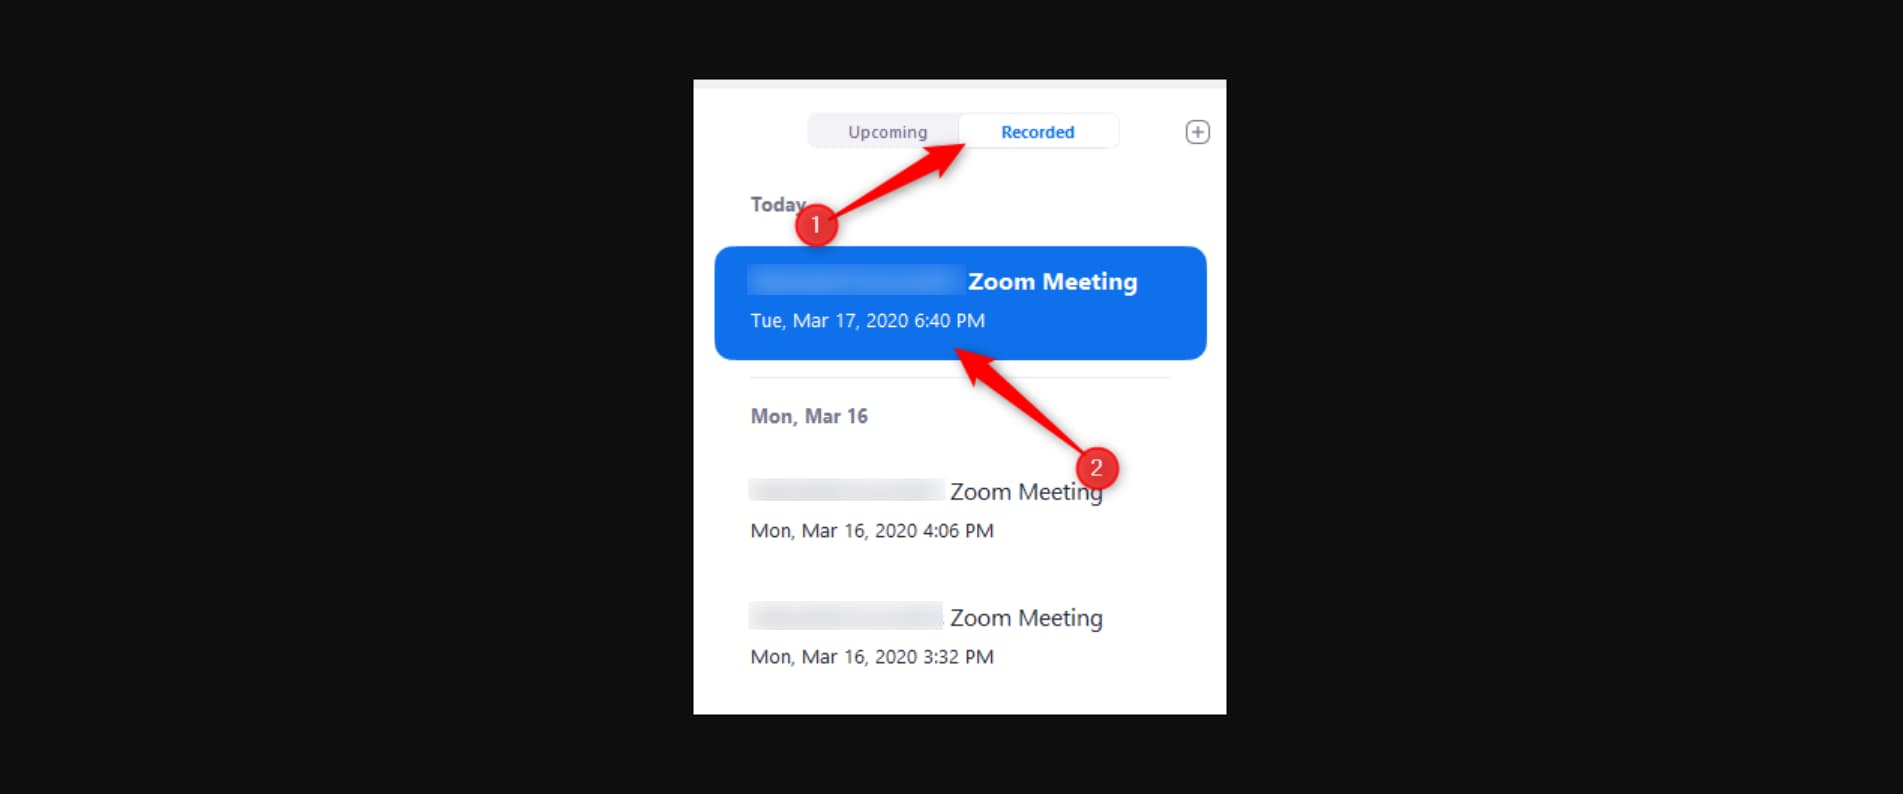 click the recorded label and select the meeting you want to view